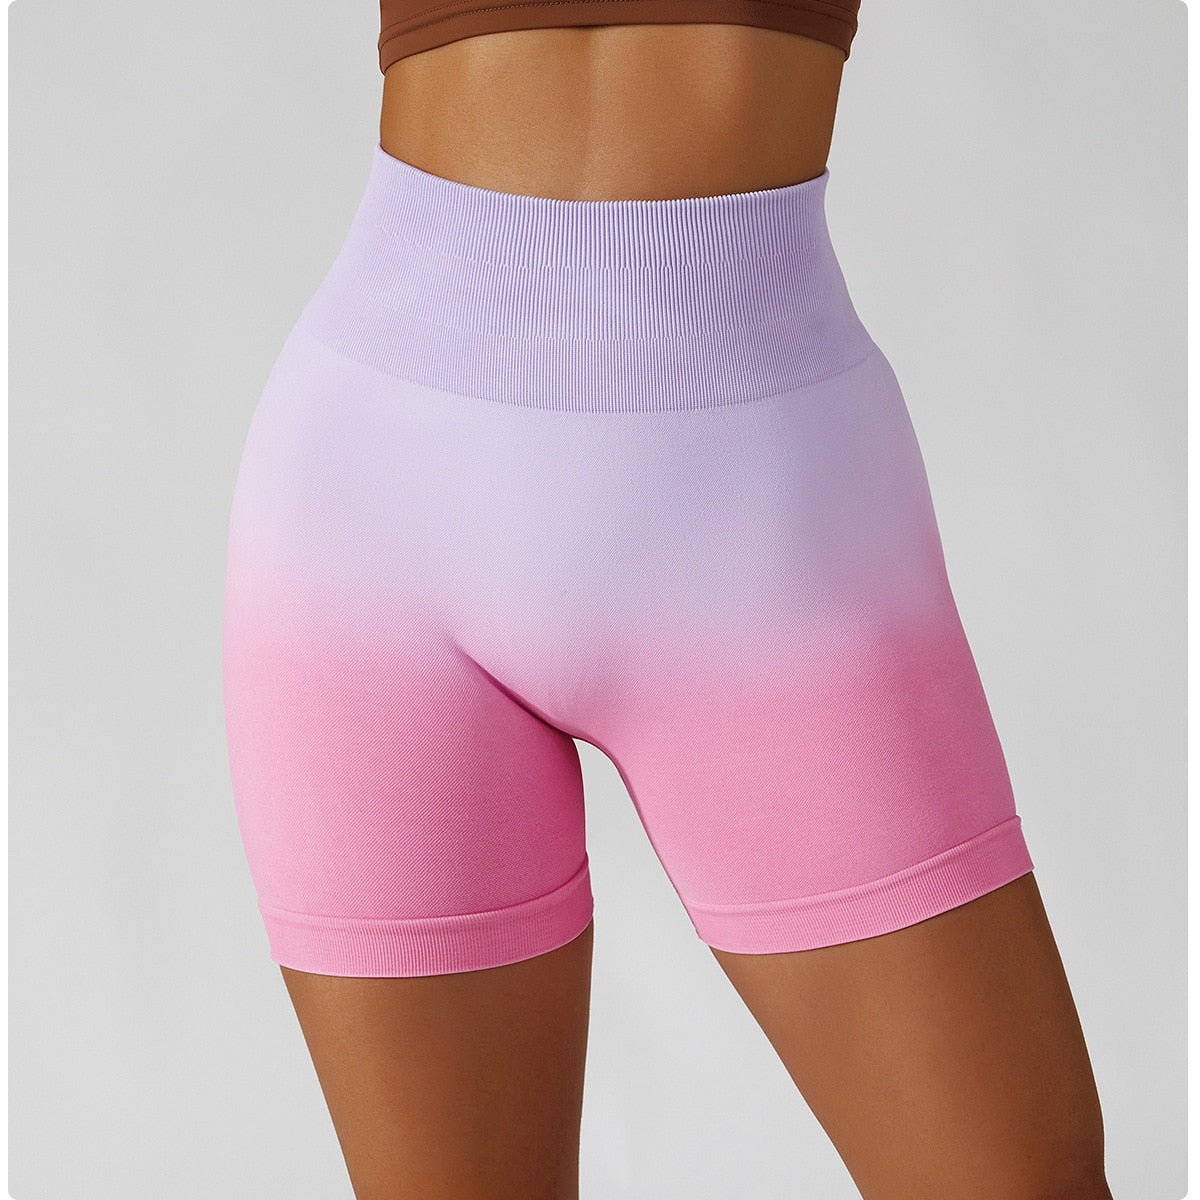 Gradient Seamless Yoga Shorts Gym Running Workout Tight Sports Shorts High Waist Elastic Butt Lifting Fitness Pants Shorts The Clothing Company Sydney